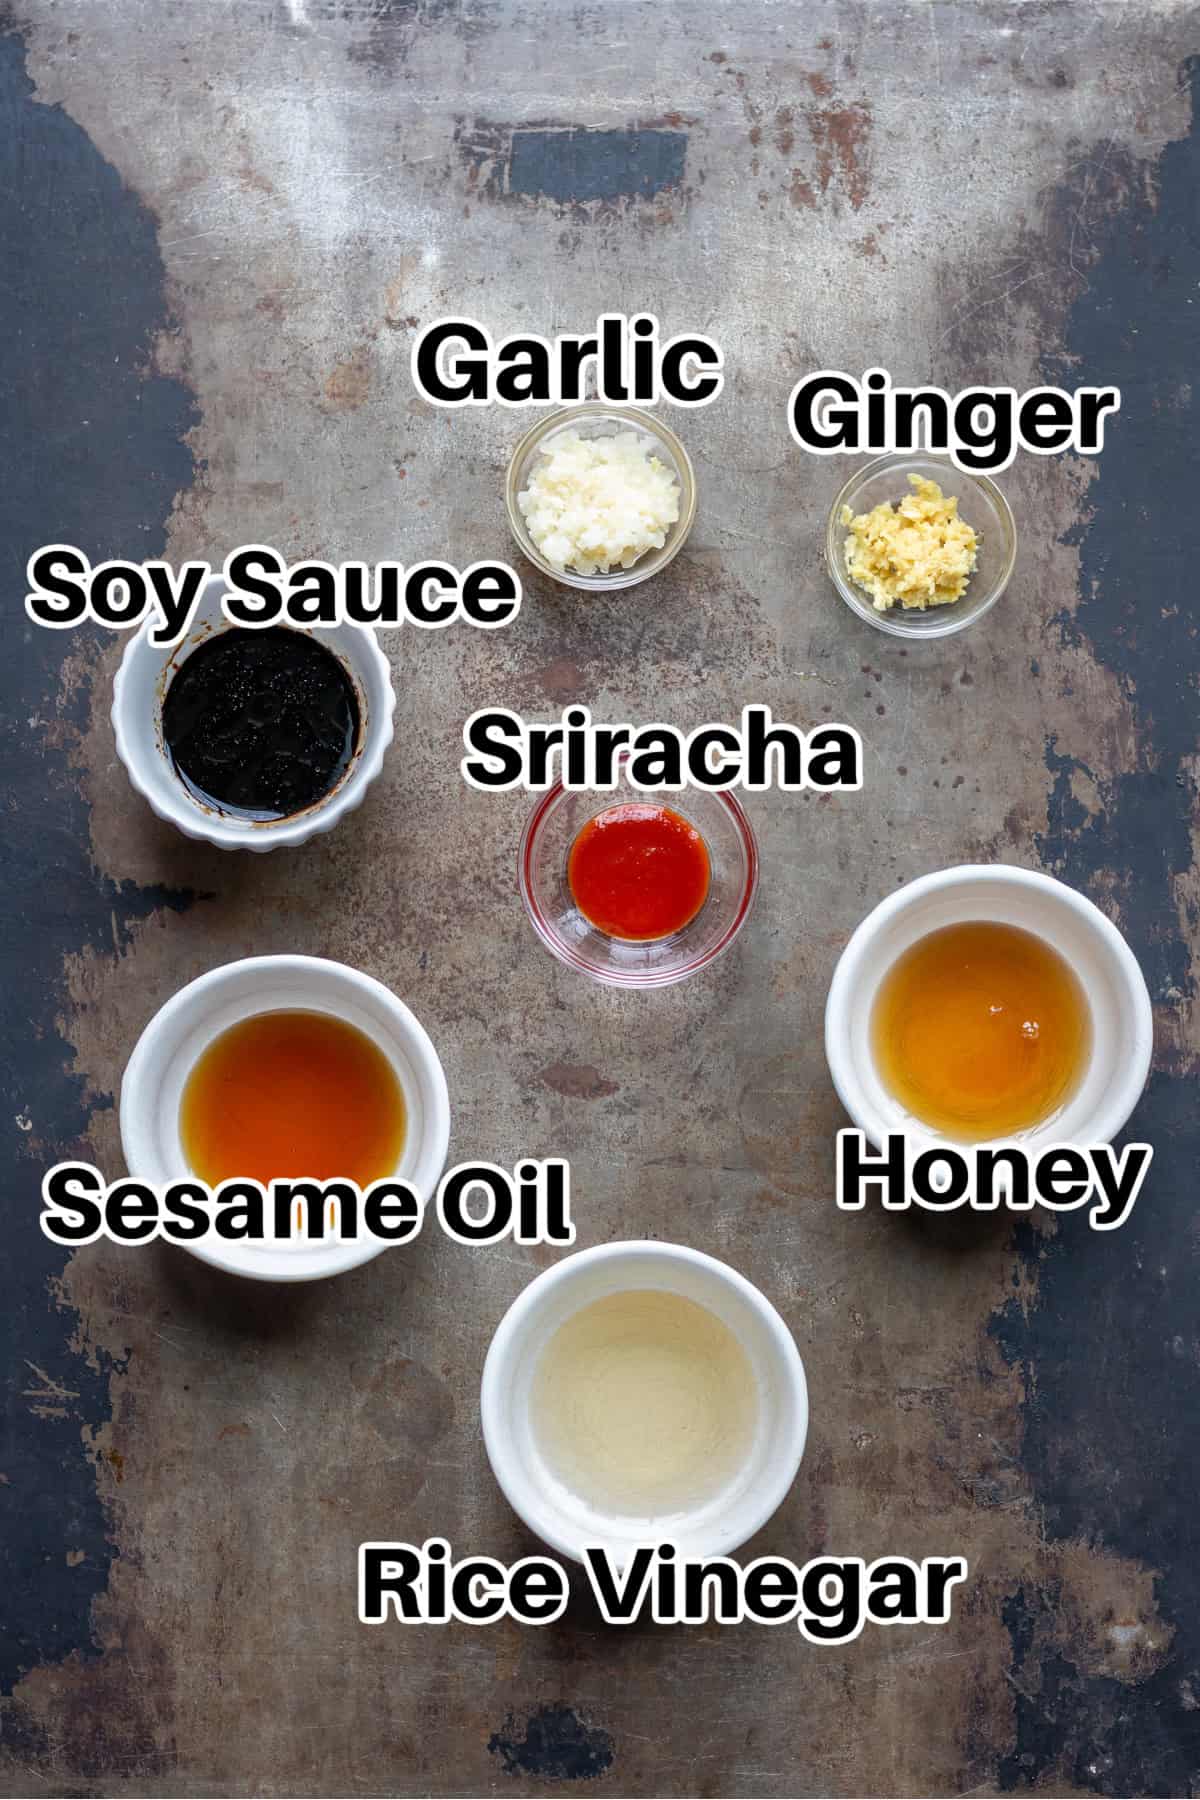 Asian dressing ingredients on a table, including garlic, ginger, soy sauce and honey.